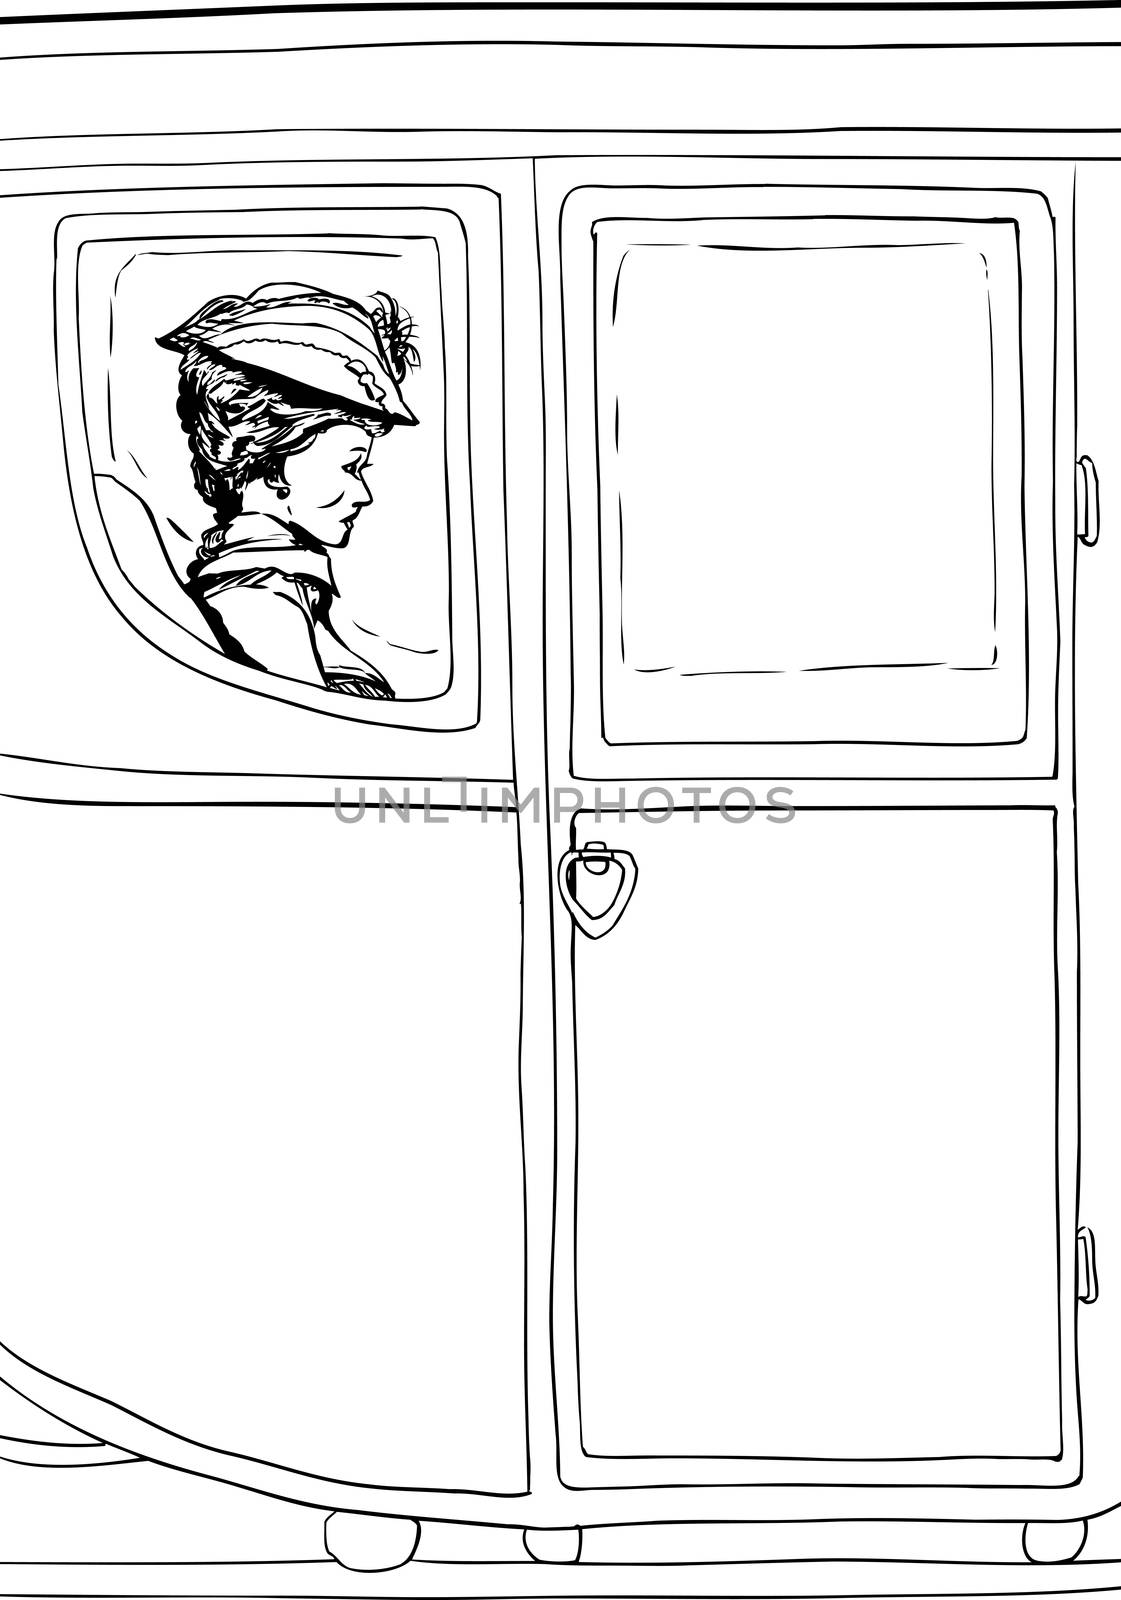 Outline of wealthy 18th century woman seated in luxurious carriage with glass windows